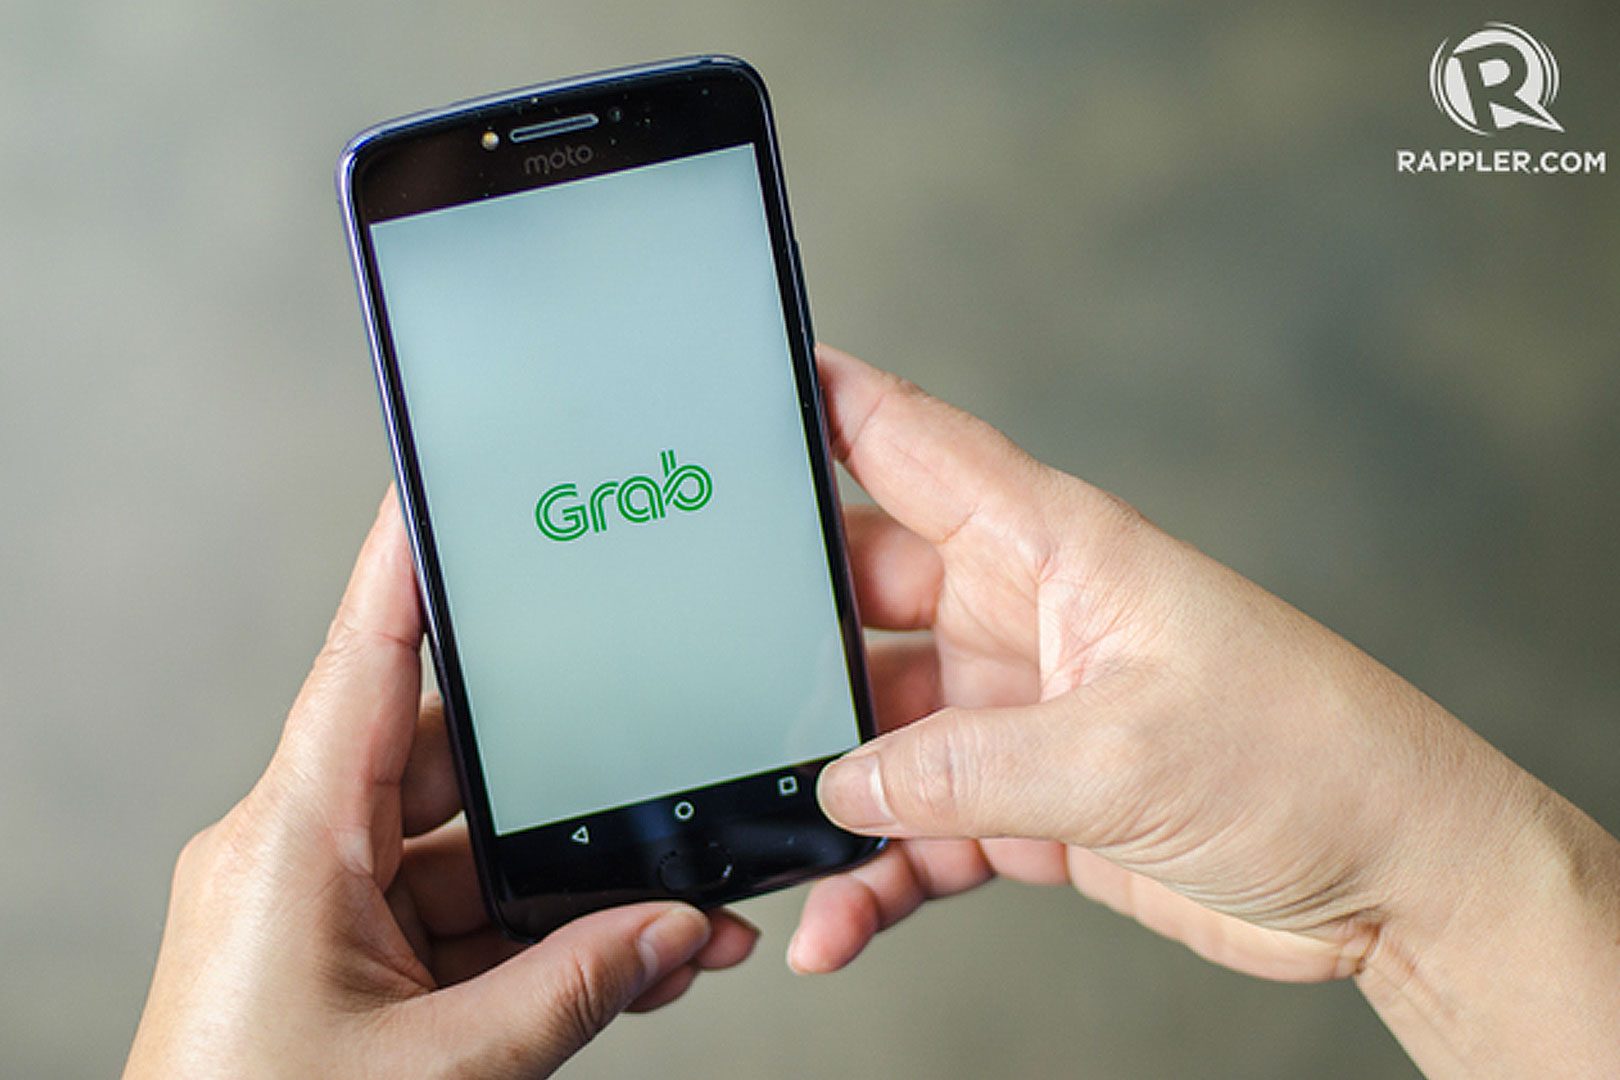 Deactivated Grab drivers ask LTFRB, DOTr for ‘understanding, compassion’